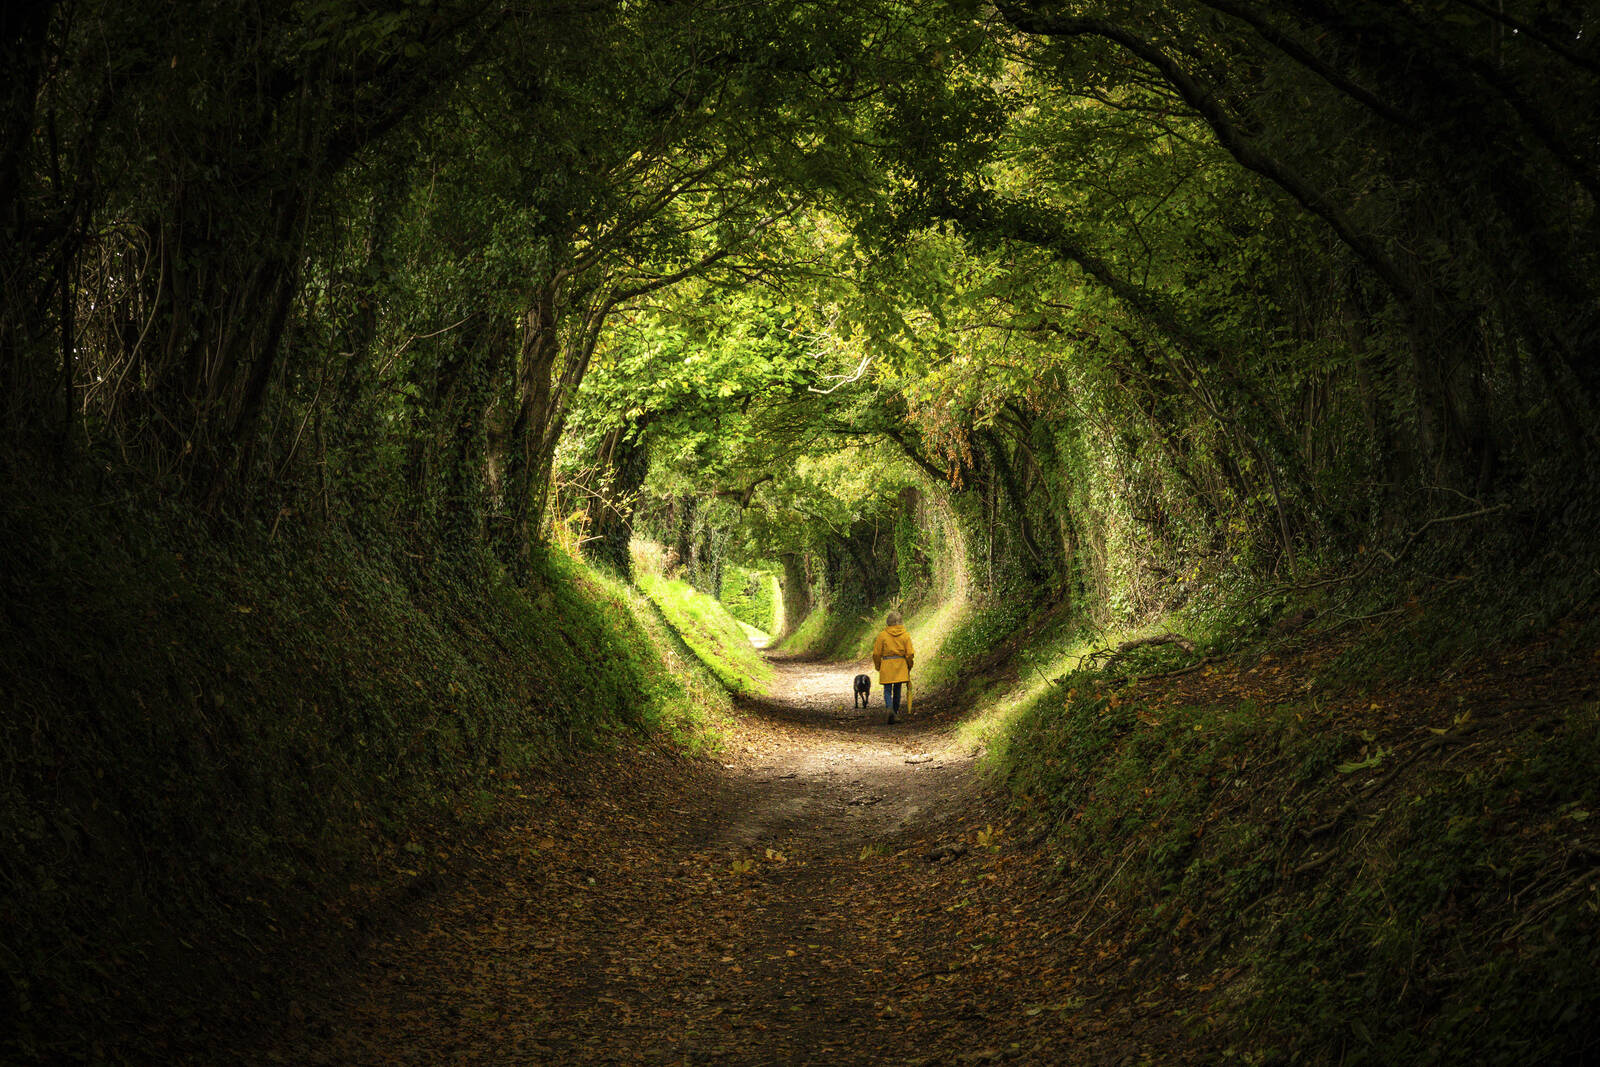 Image of Halnaker Tree Tunnel by Richard Joiner